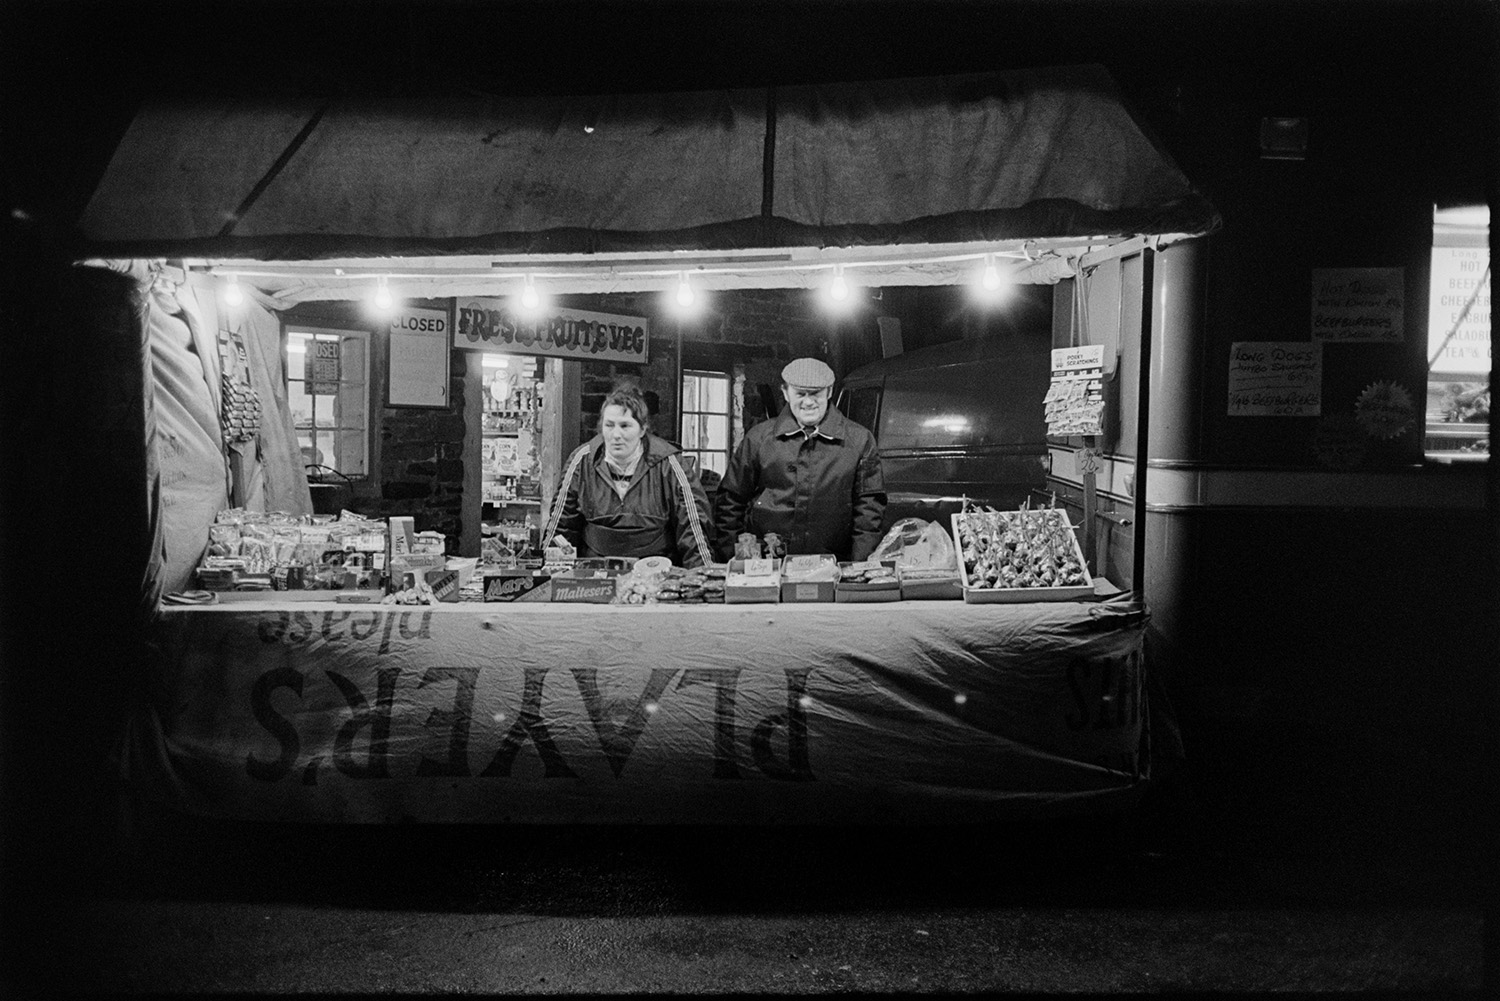 Stall selling hot dogs, sweets and toffee apples at carnival at night. <br />
[Susan Jury and Ken Jury selling toffee apples, sweets and chocolate at a stall at Dolton Carnival at night.]